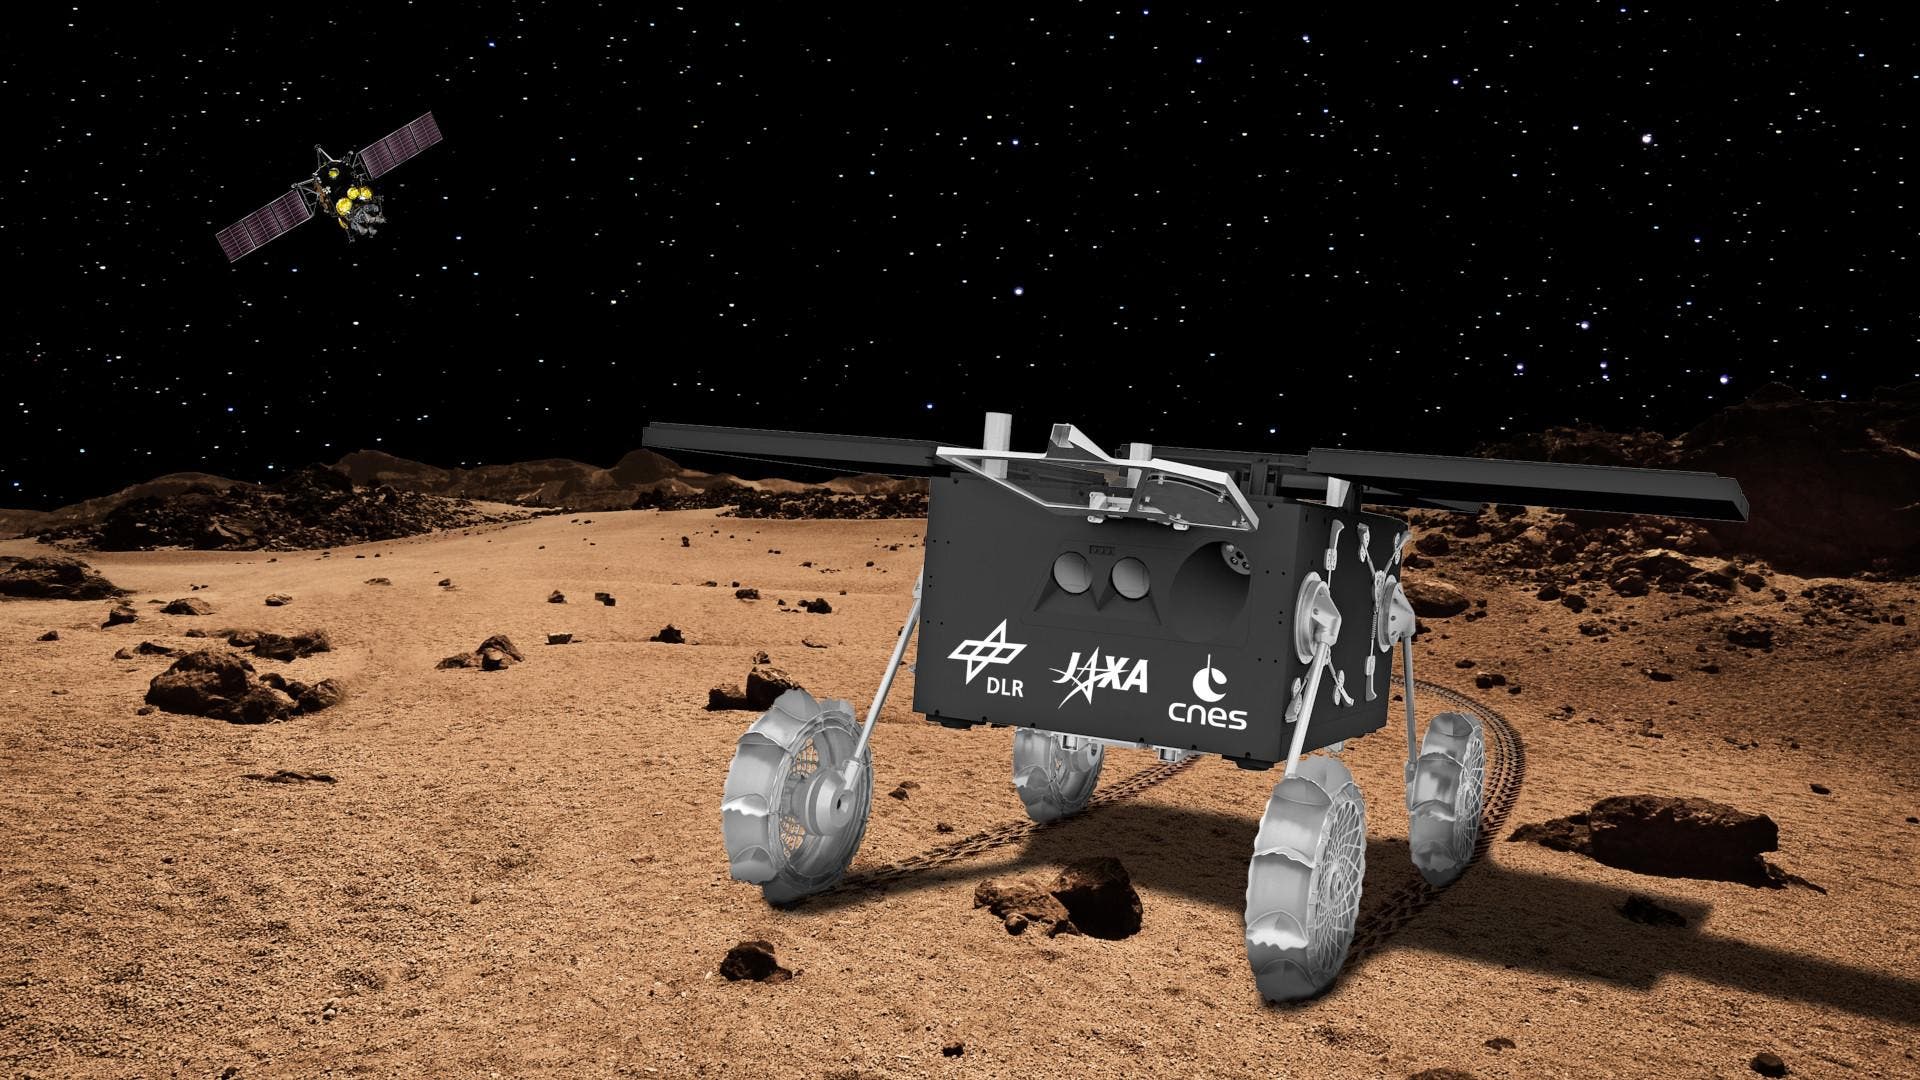 Mars Moon Probe MMX: The journey to Phobos begins with the first stage